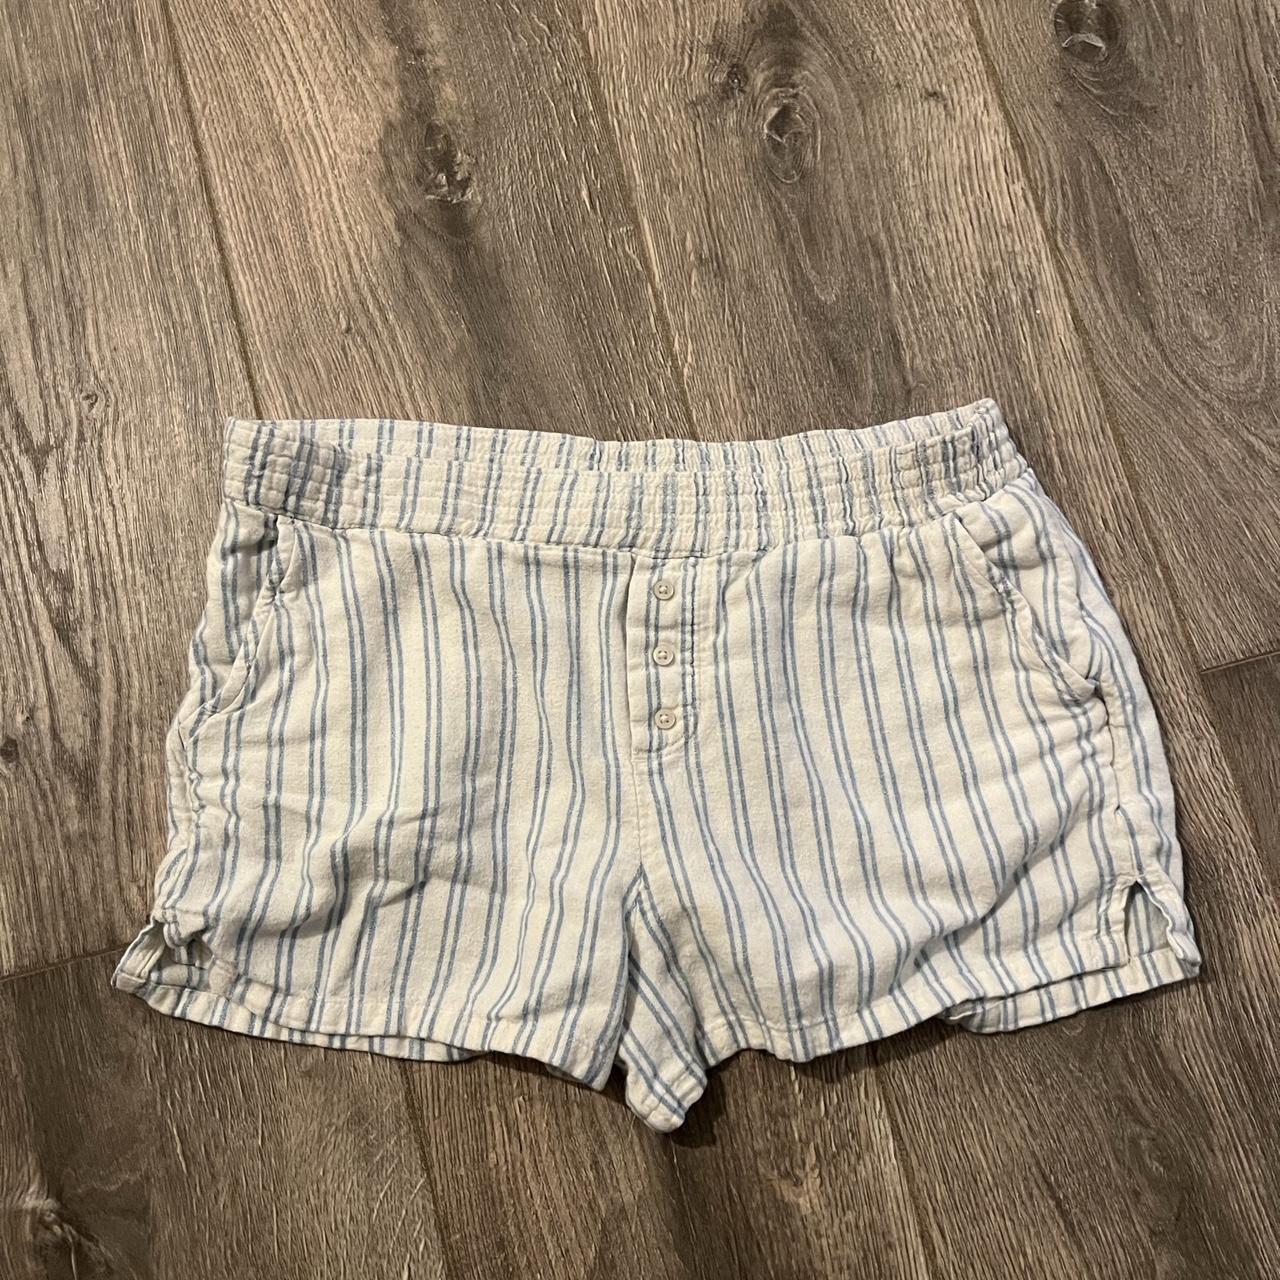 abercrombie and fitch classic blue & white striped... - Depop